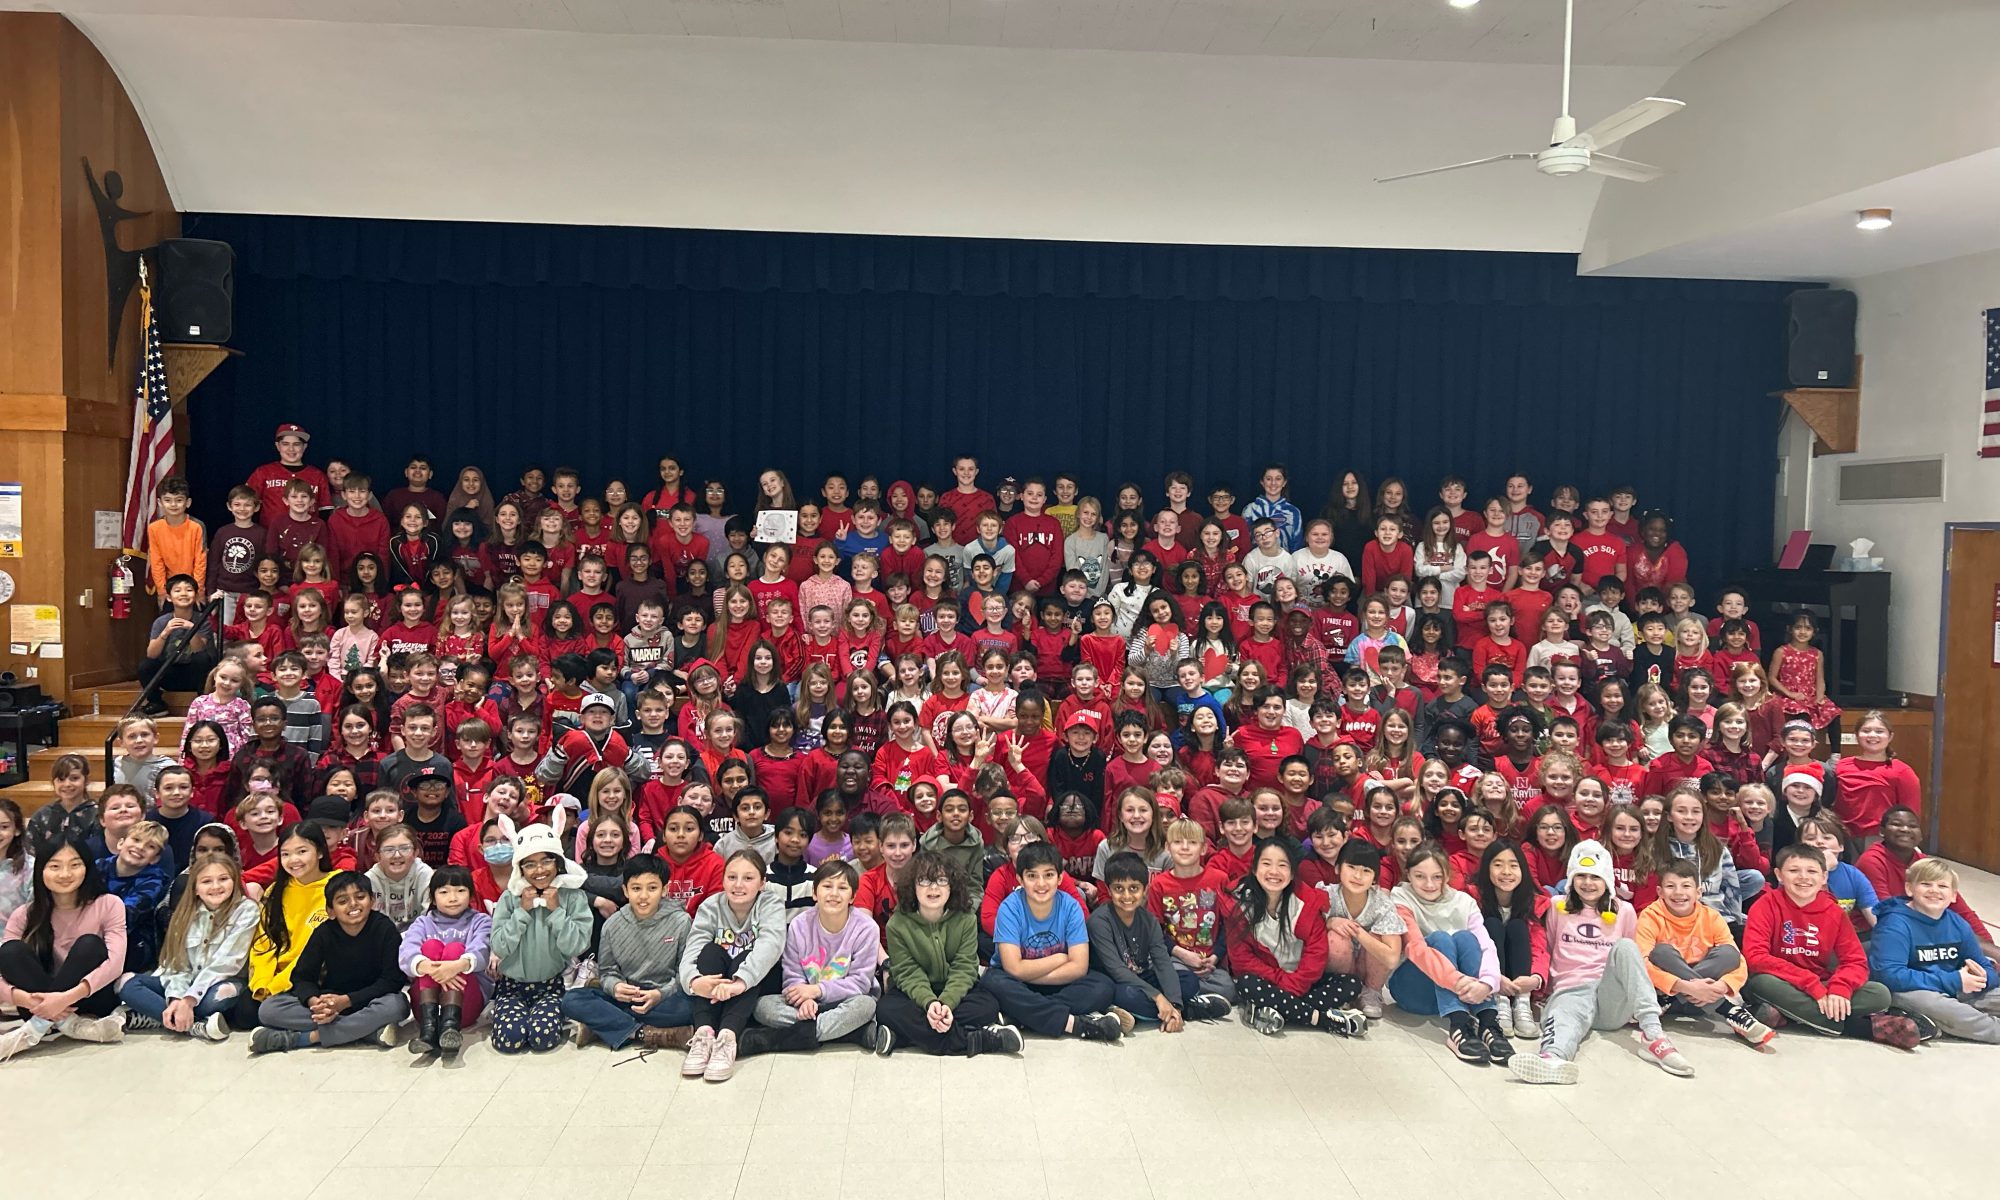 Large assembly of students wearing red